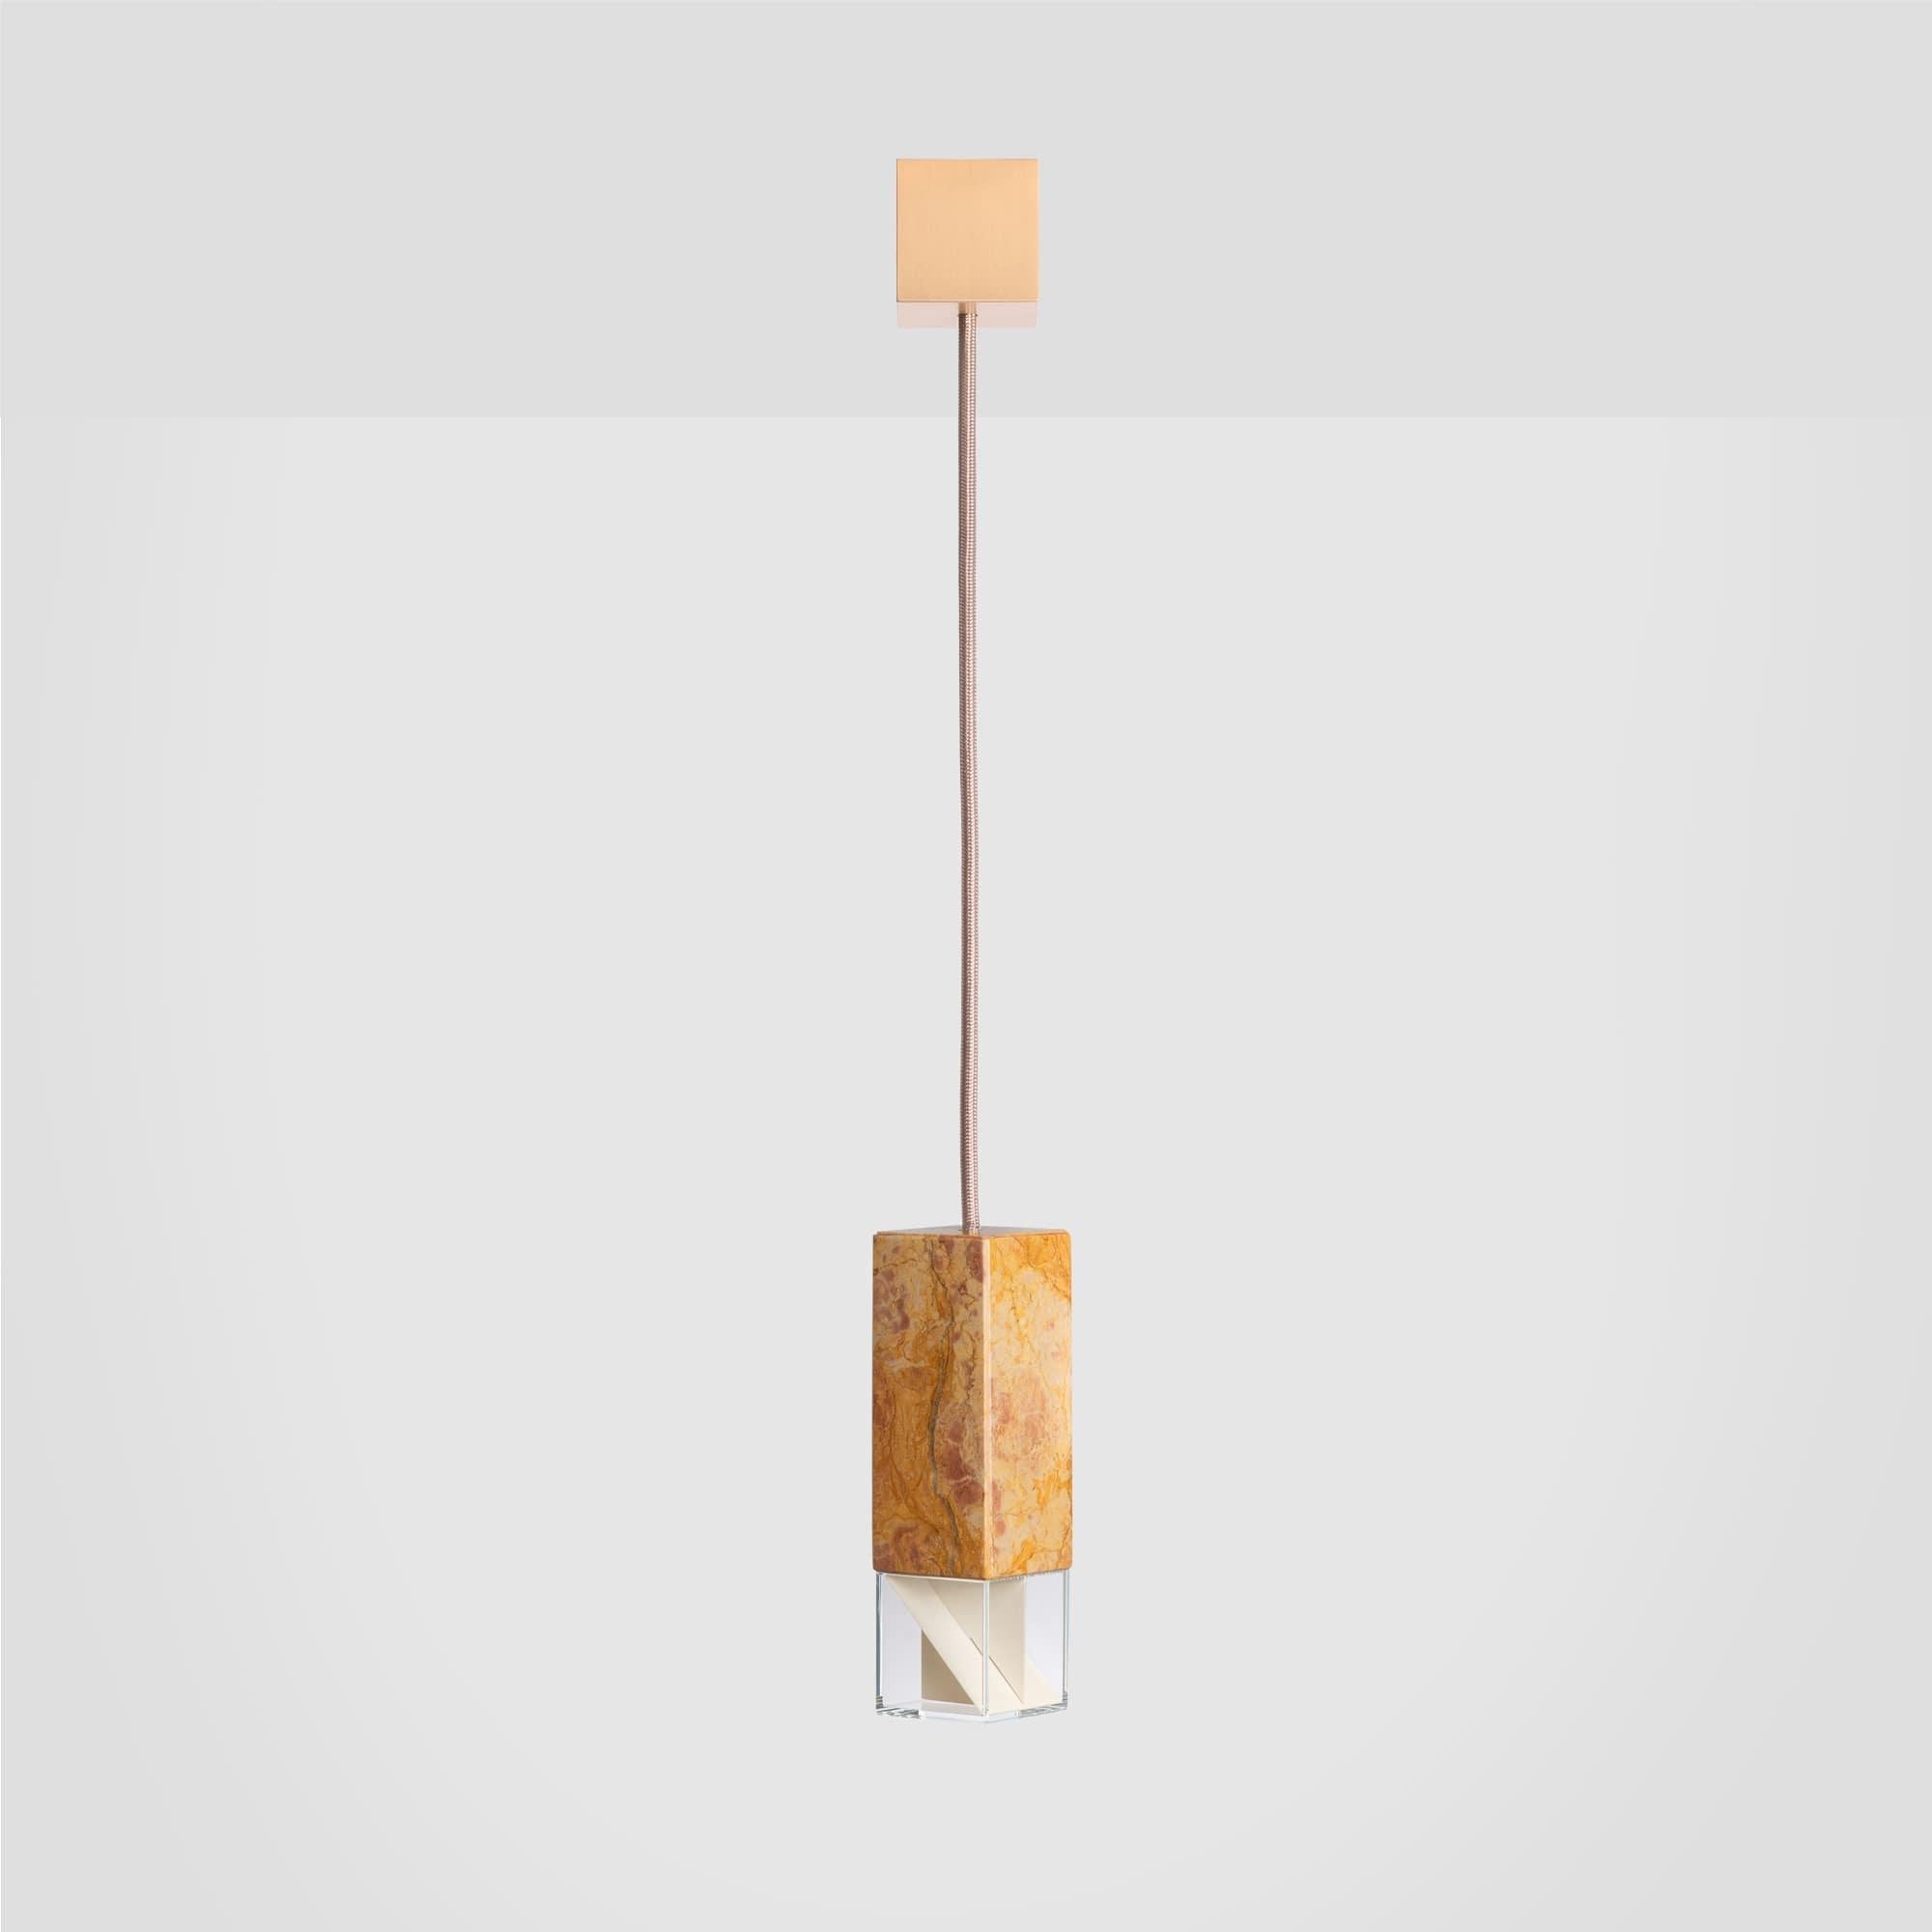 Lamp one color edition by Formaminima
Dimensions: 5 x 5 x H 17 cm
Materials: Lamp body in marble giallo reale rosato
Ultra- thin anti-reflection crystal diffuser
Inside- diffuser Limoges biscuit-finish porcelain sheets

Satin brass ceiling